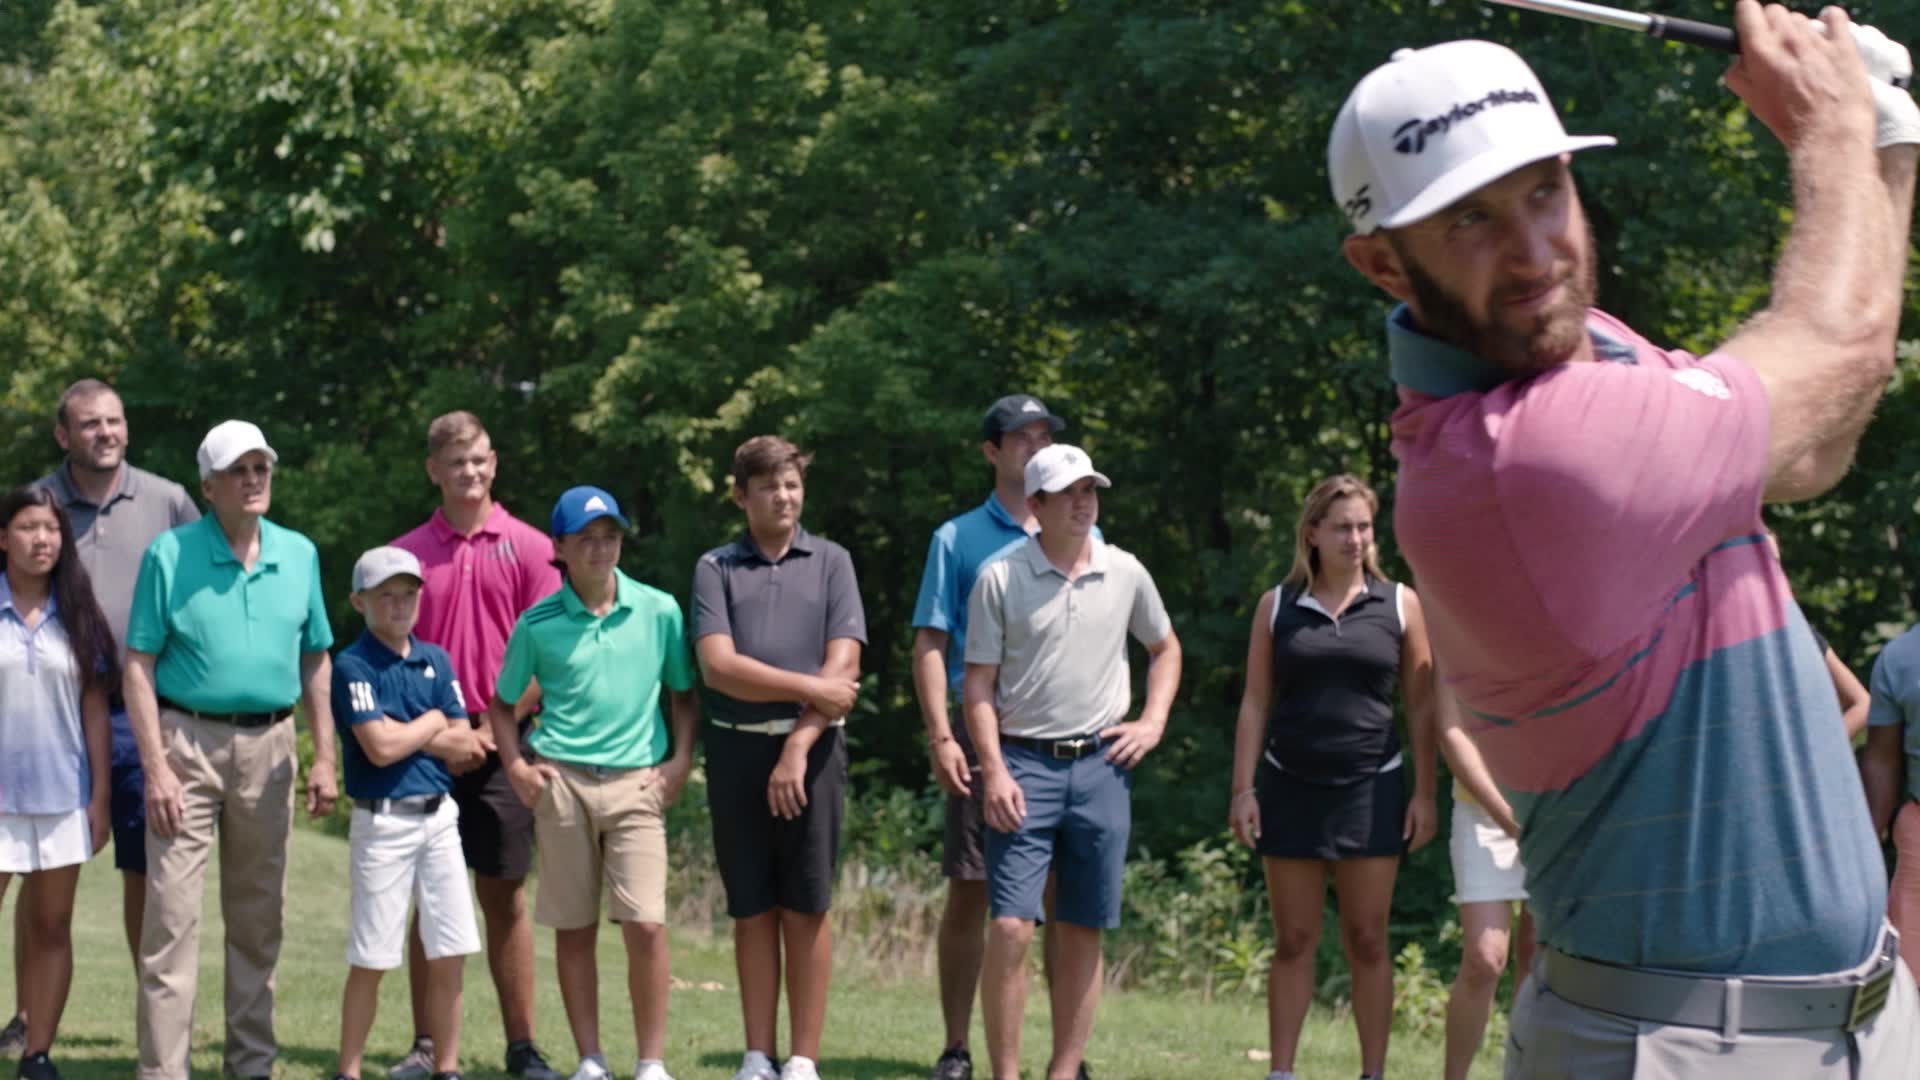 adidas Golf calling athletes everywhere to join them on the greatest in sports